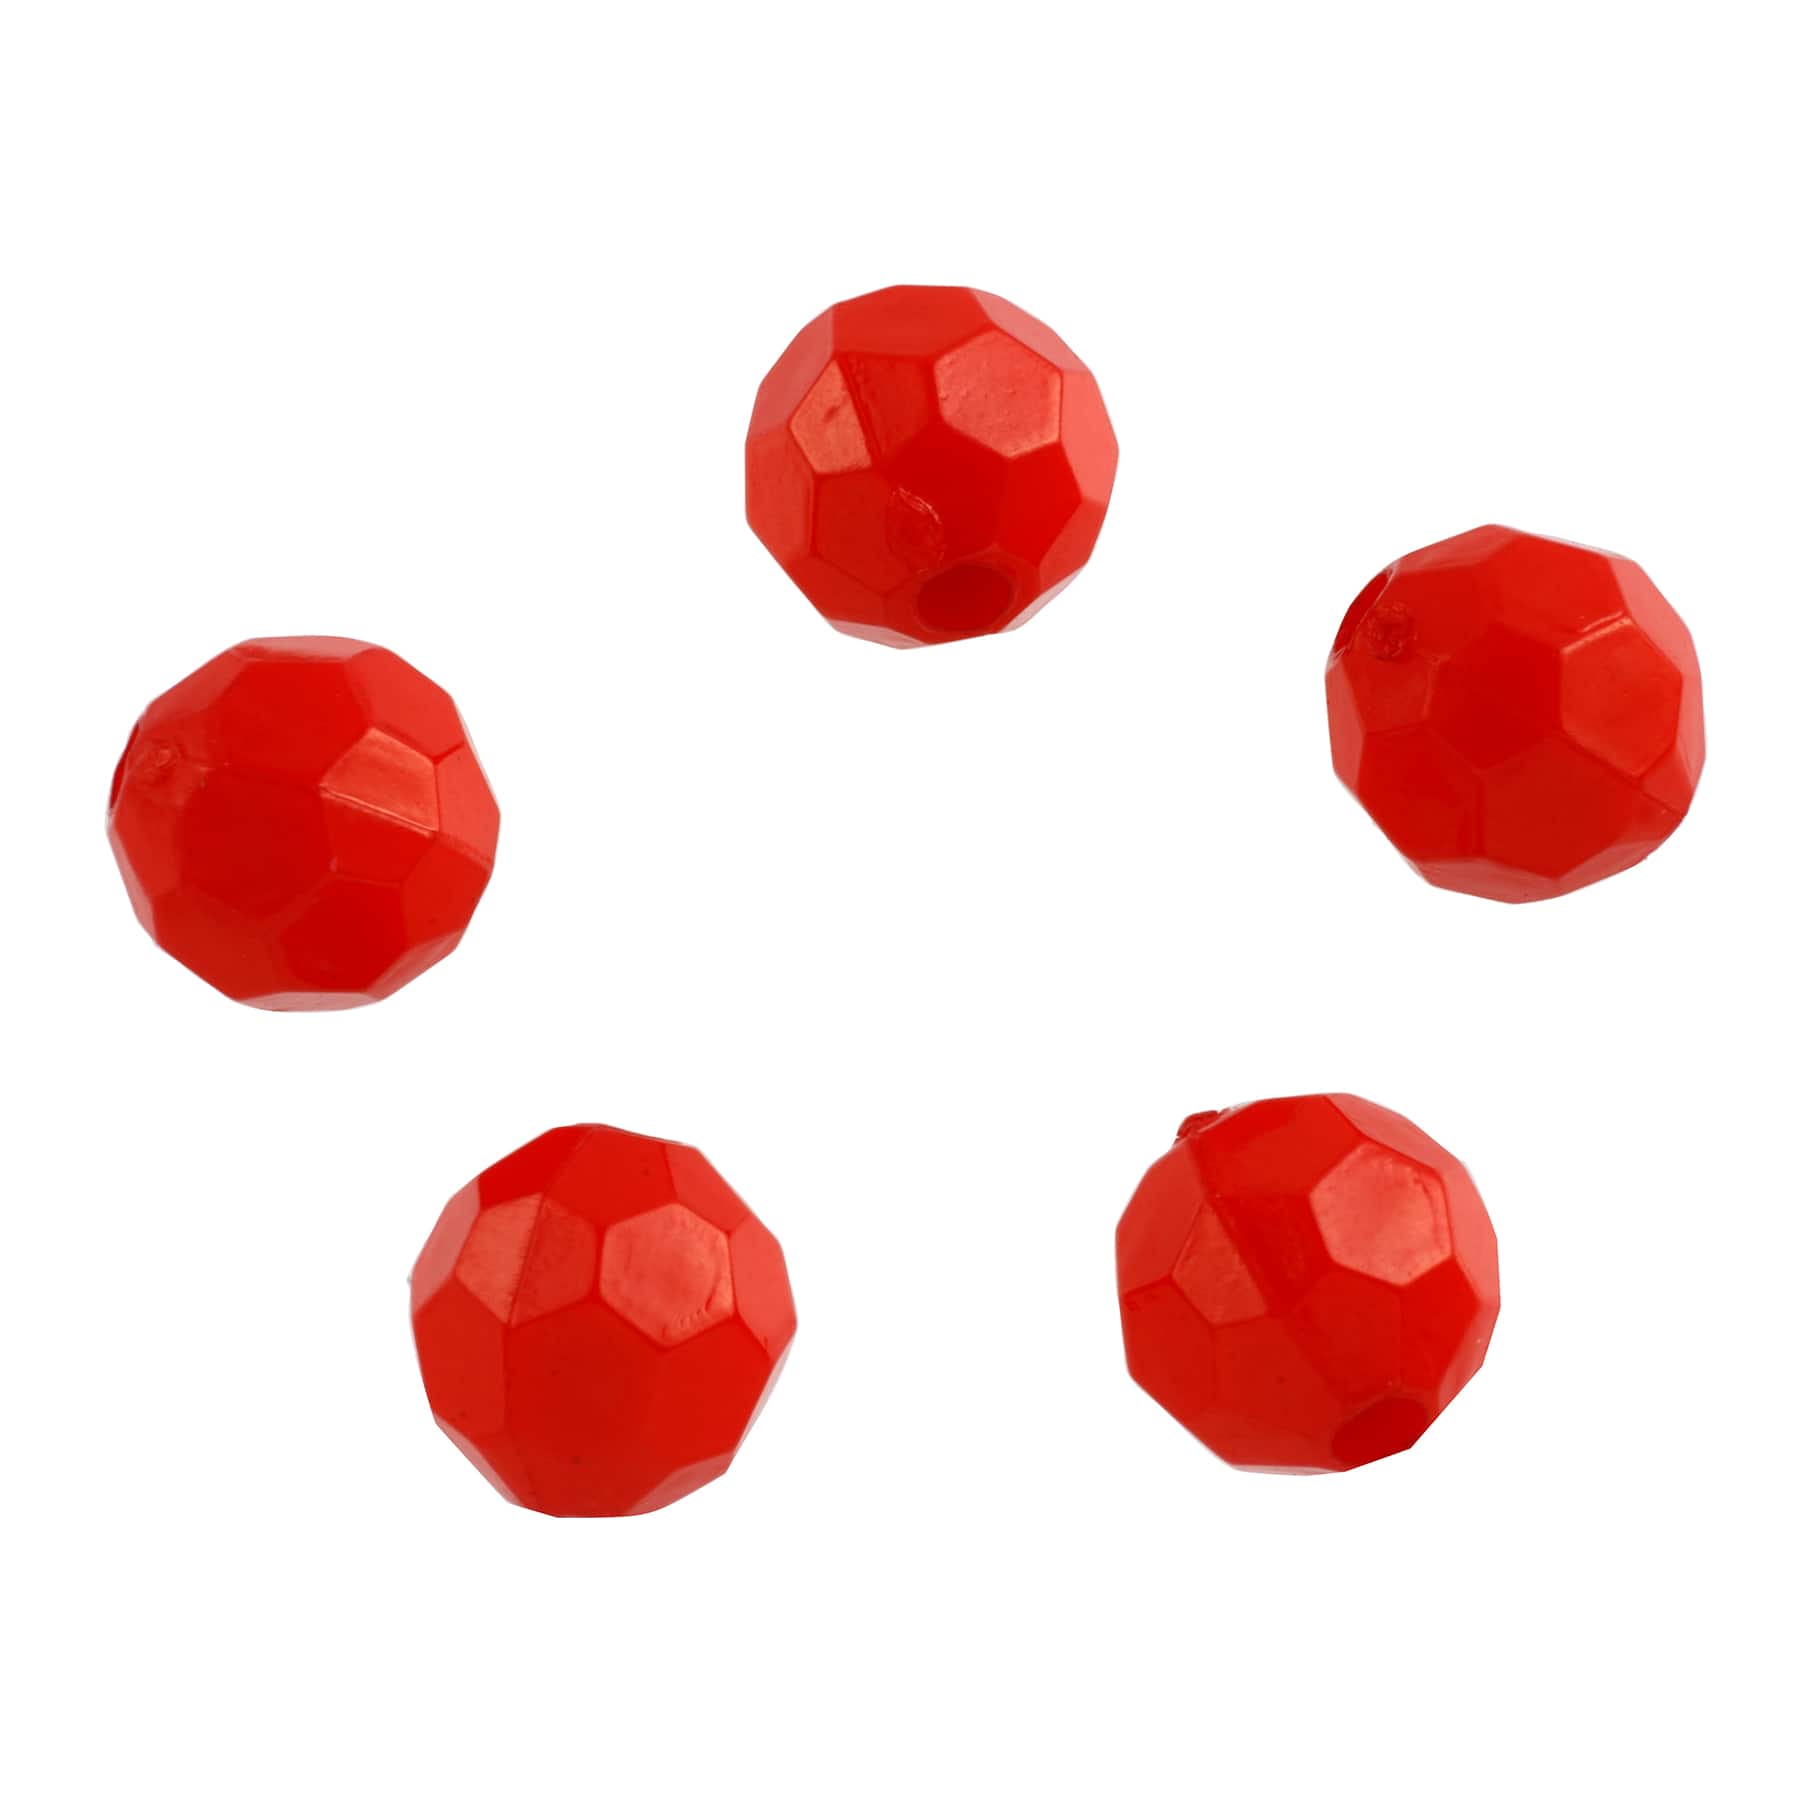  Tiny Red Beads for Jewelry Making - Plastic Faceted 4mm Round  Beads 0.5 lb Bulk : Arts, Crafts & Sewing